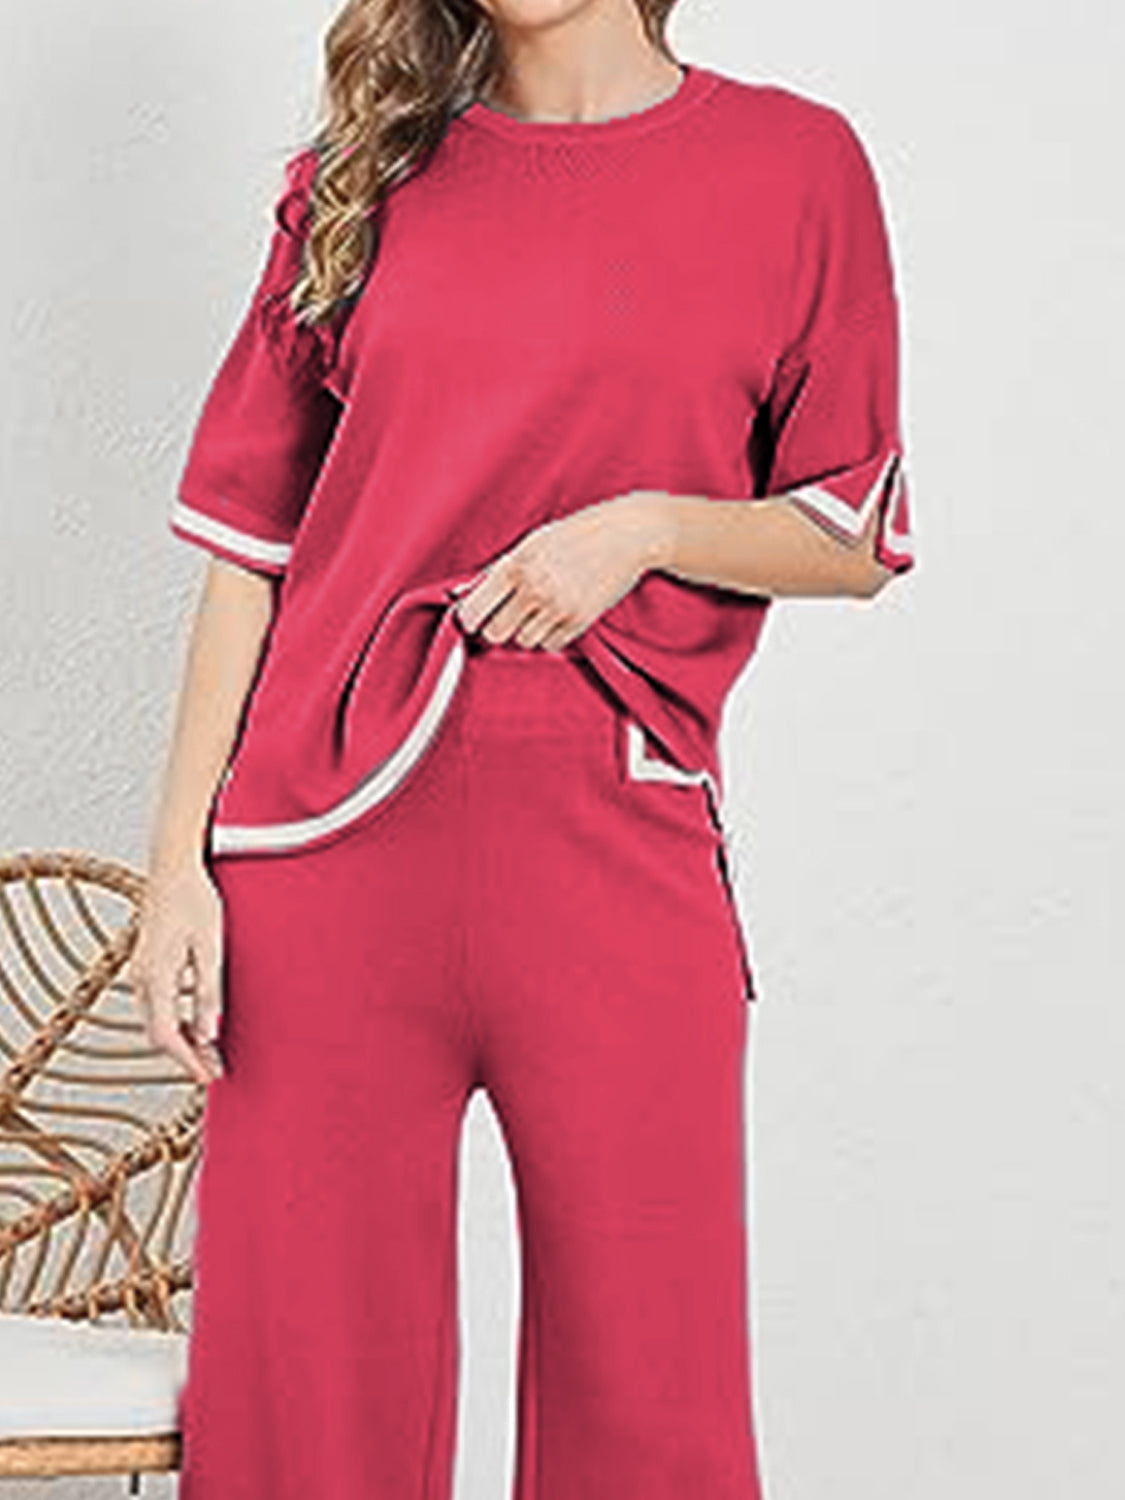 Maroon Contrast High-Low Sweater and Knit Pants Set Sentient Beauty Fashions Apparel &amp; Accessories